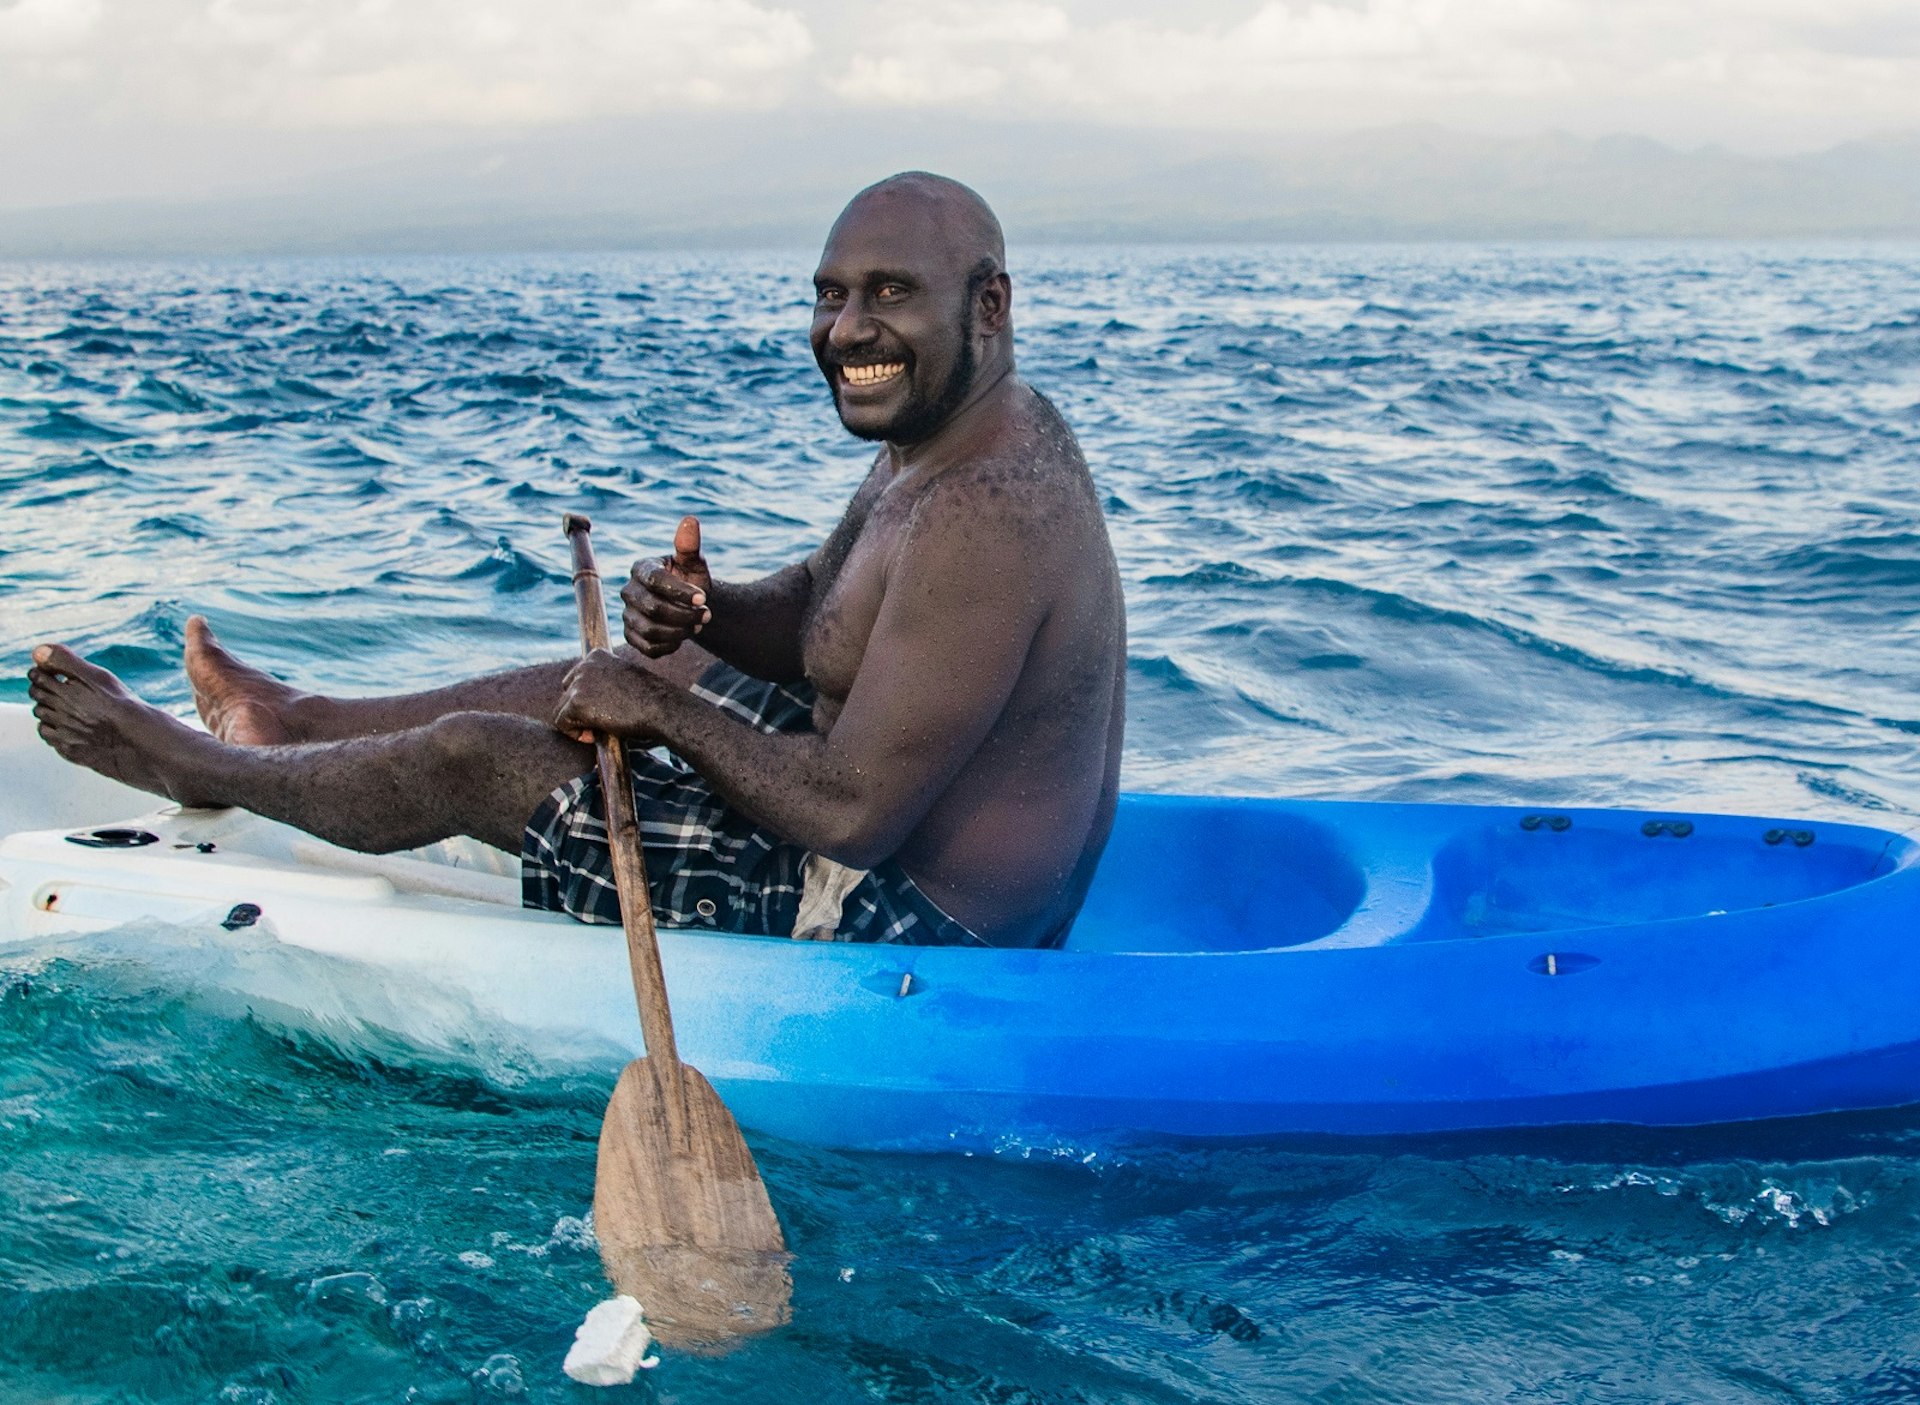 A man in a plastic kayak that fades from blue to white, holding a wooden paddle, grinning at the camera. The man is surrounded by the Pacific Ocean and there are white clouds on the horizon